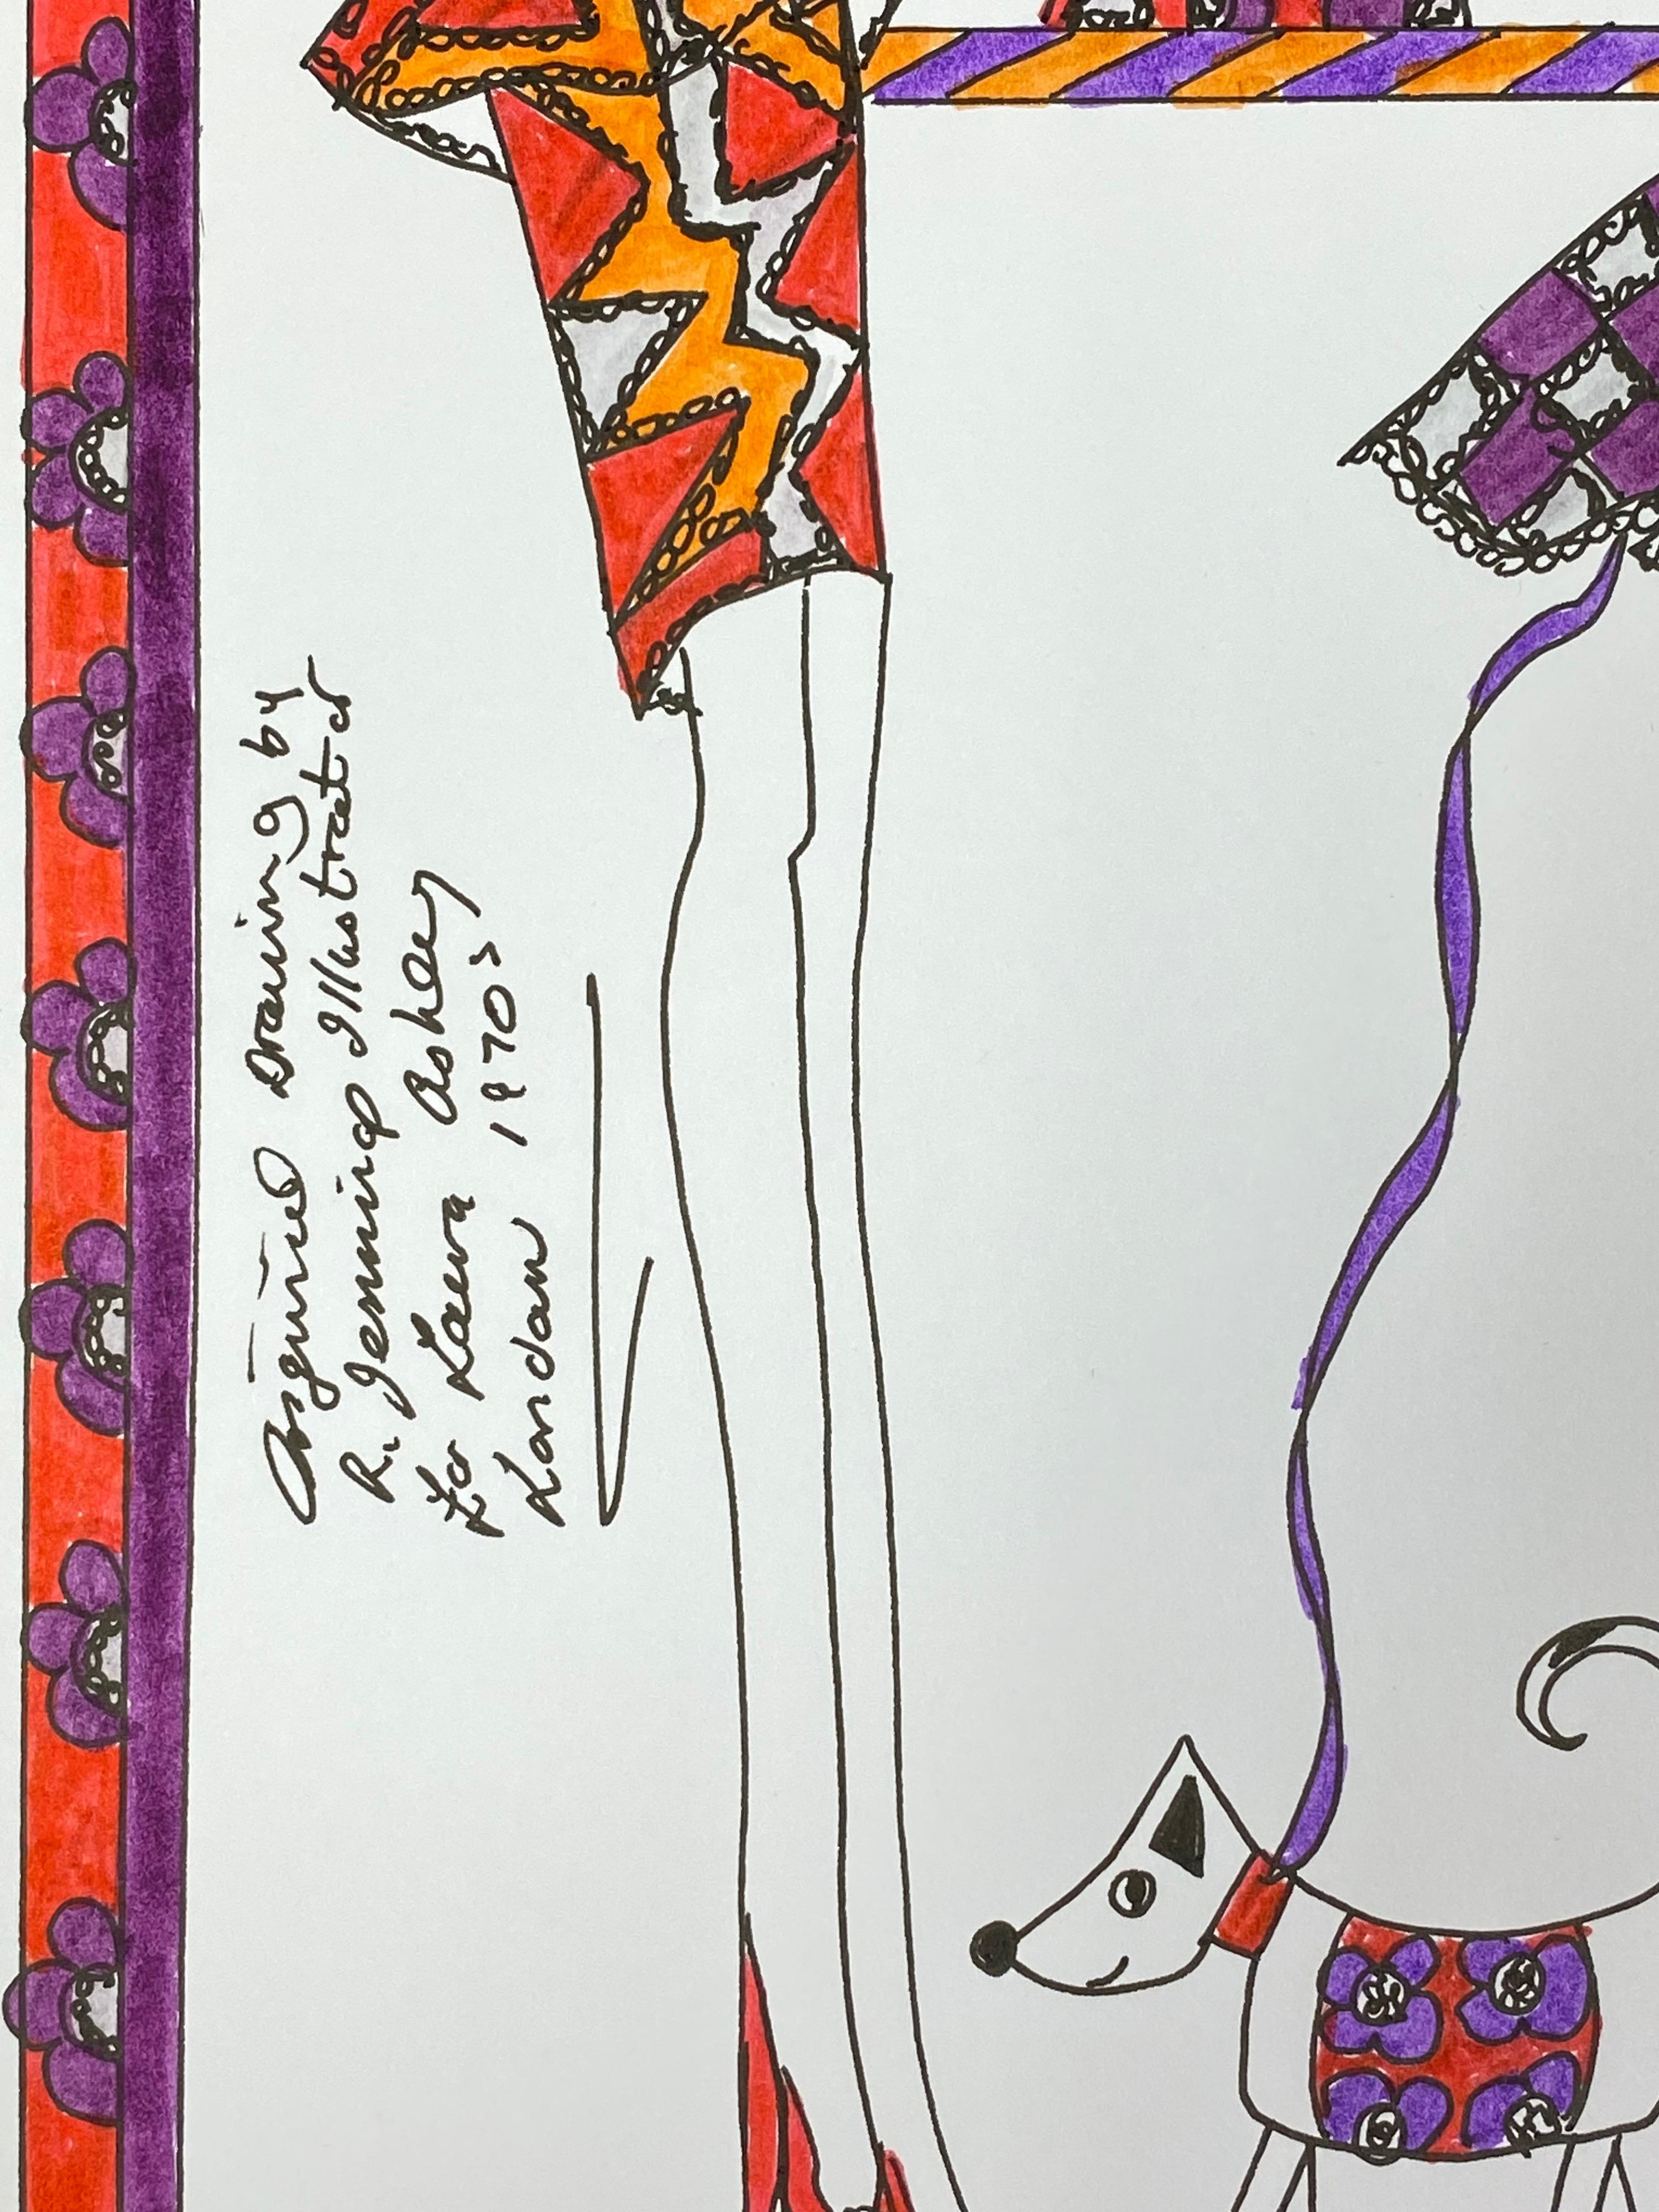 Original Fashion Design Illustration
by Roz Jennings, British
watercolor and ink on card, unframed
size: 12 x 8.25 inches
condition: very good

A beautifully colorful and characterful original artwork by British fashion designer, Roz Jennings. We